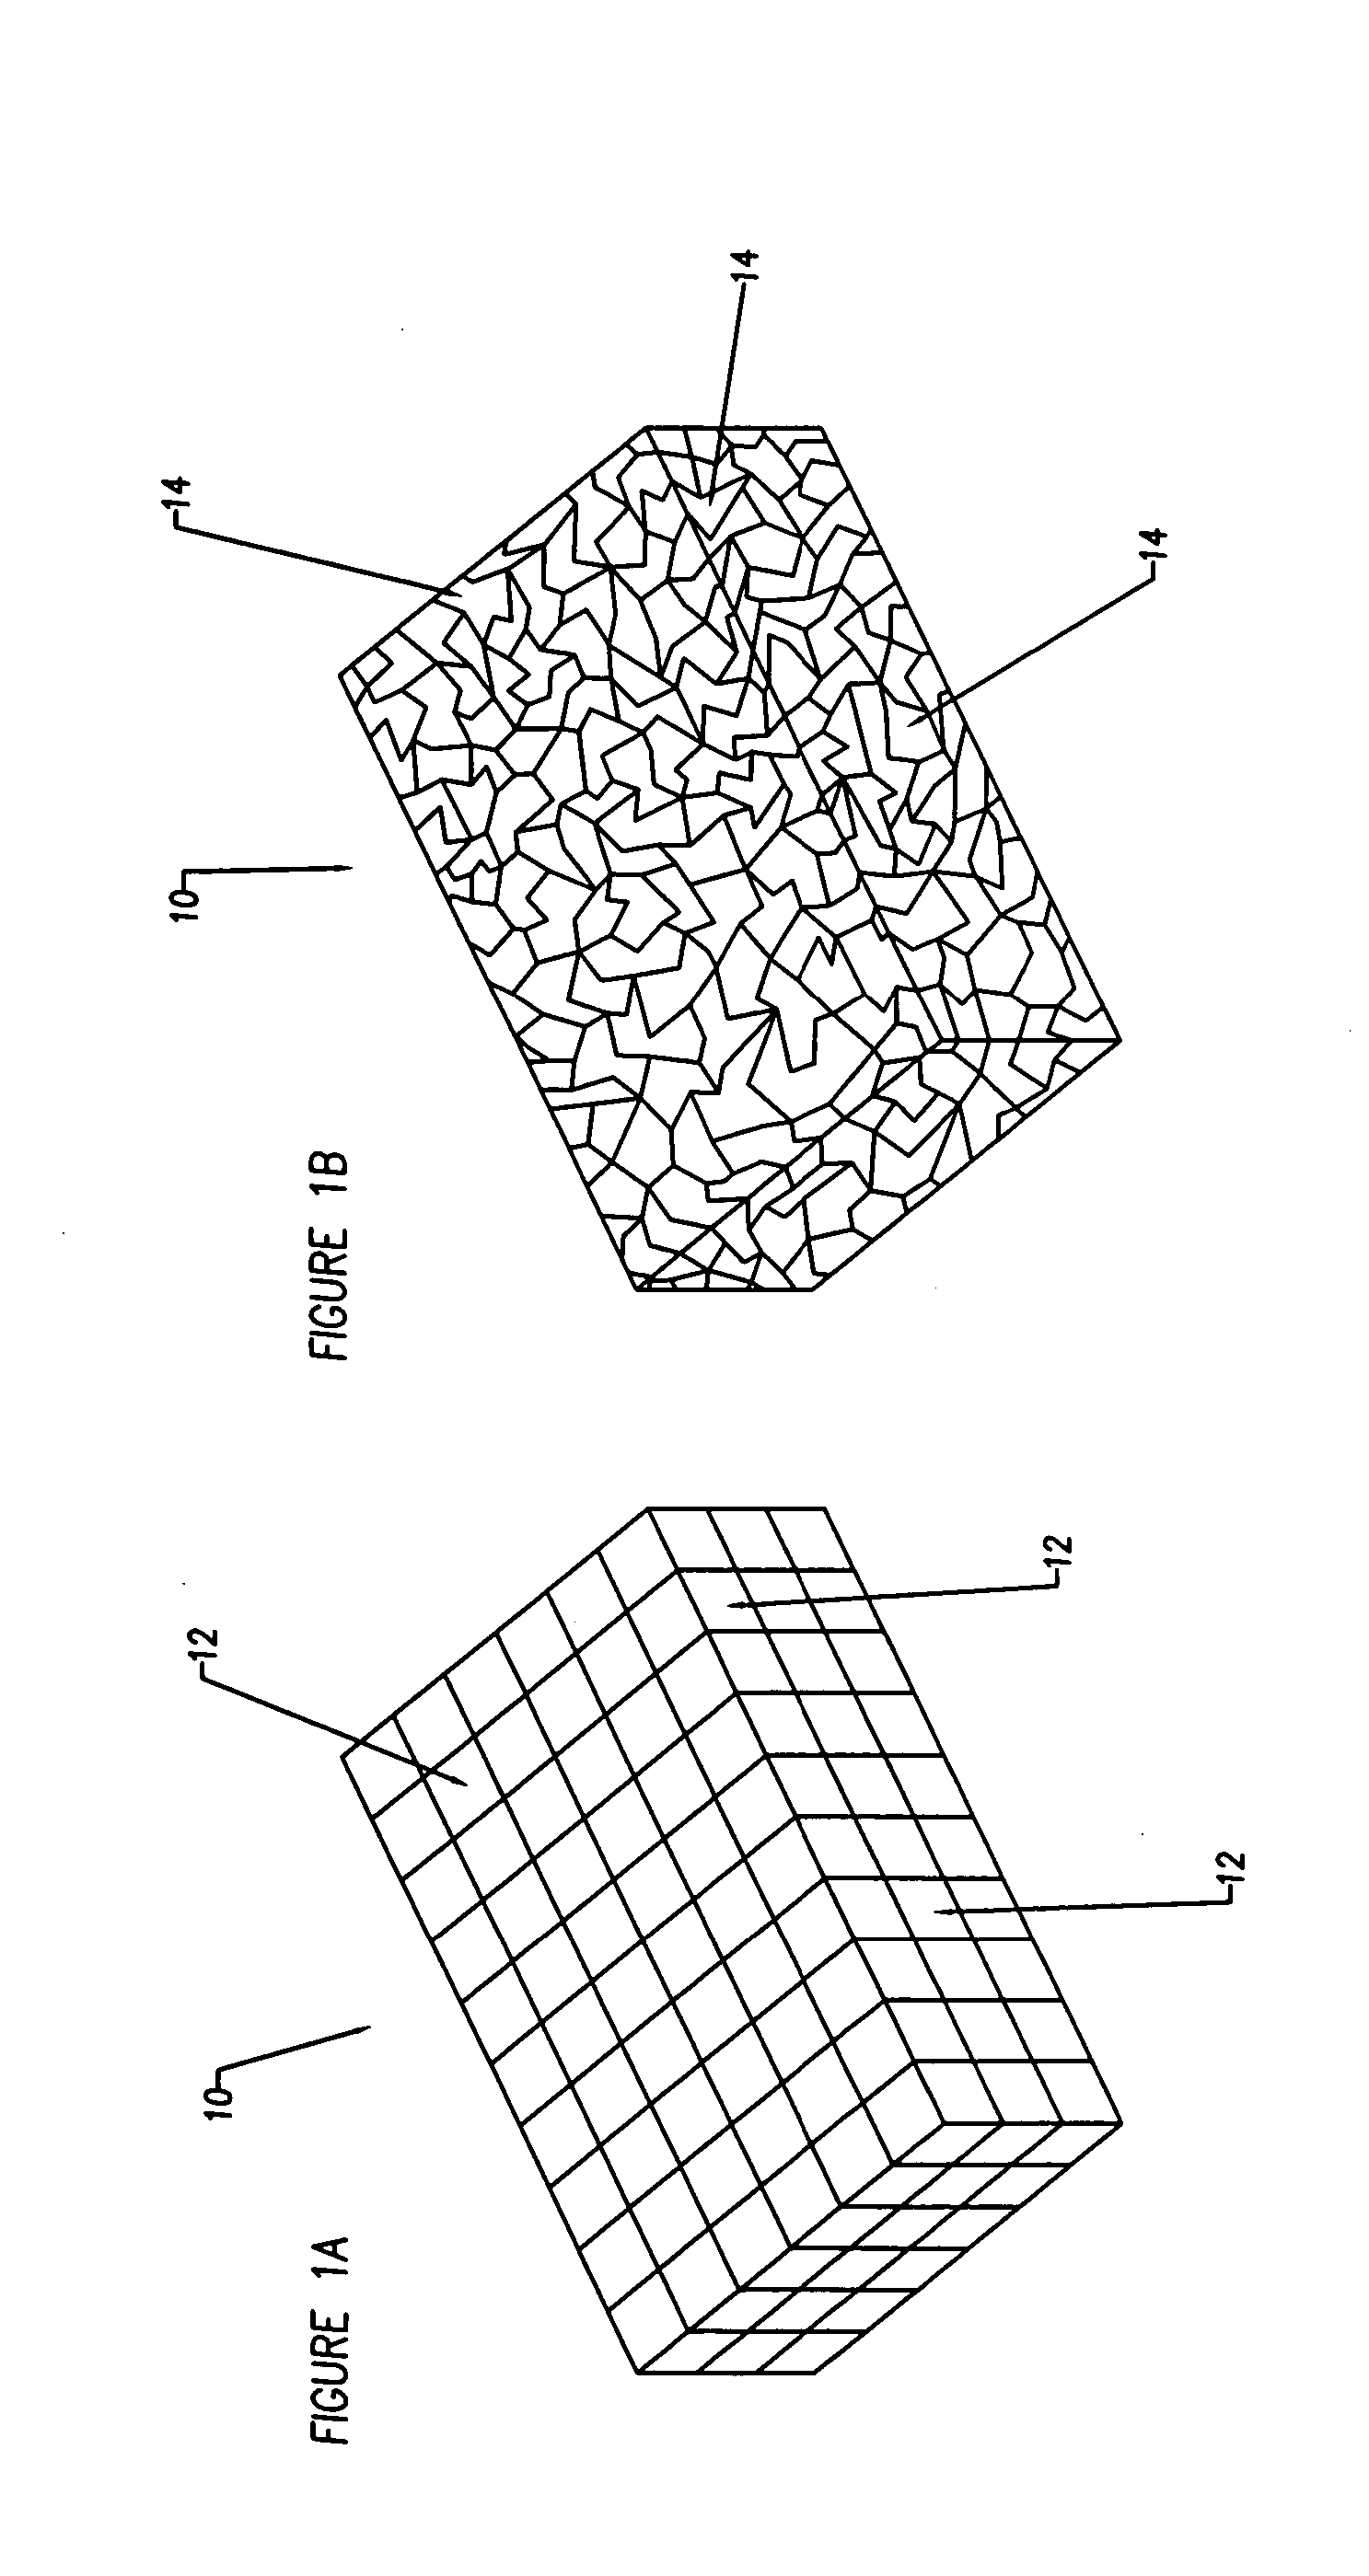 Compliant osteosynthesis fixation plate